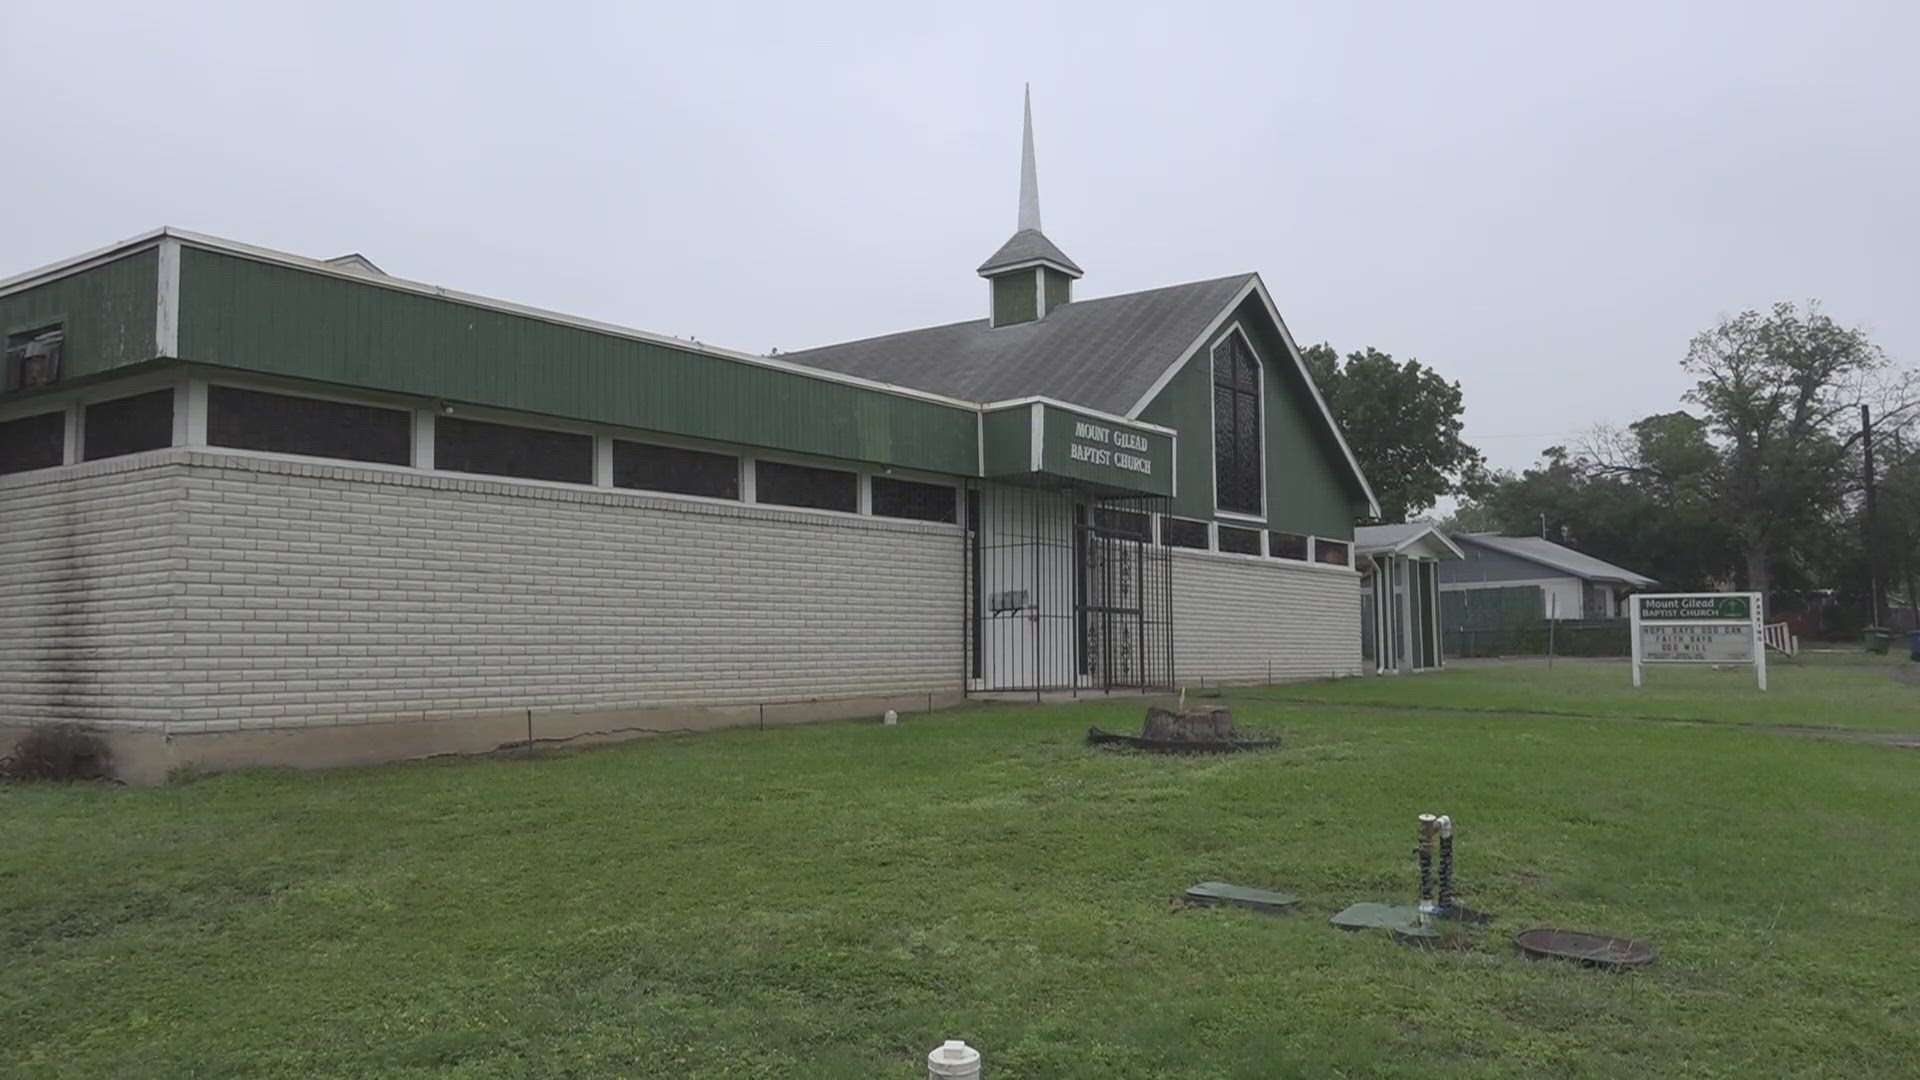 Vandals repeatedly hit church on east side, smashing windows, breaking into a shed